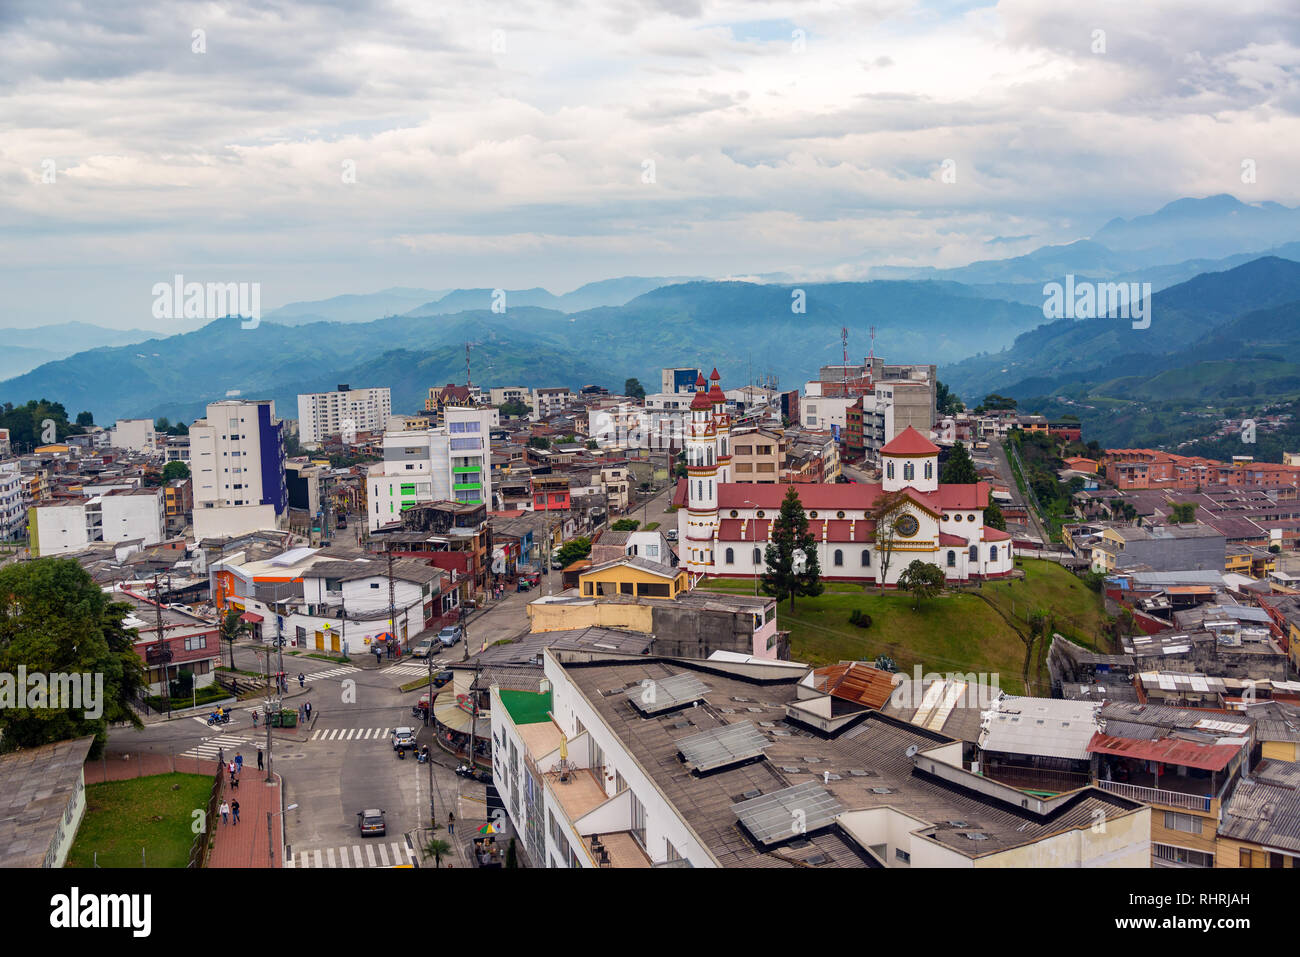 MANIZALES, COLOMBIA - JUNE 1: Our Lady of the Rosary Church and surrounding neighborhood in Manizales, Colombia on June 1, 2016 Stock Photo